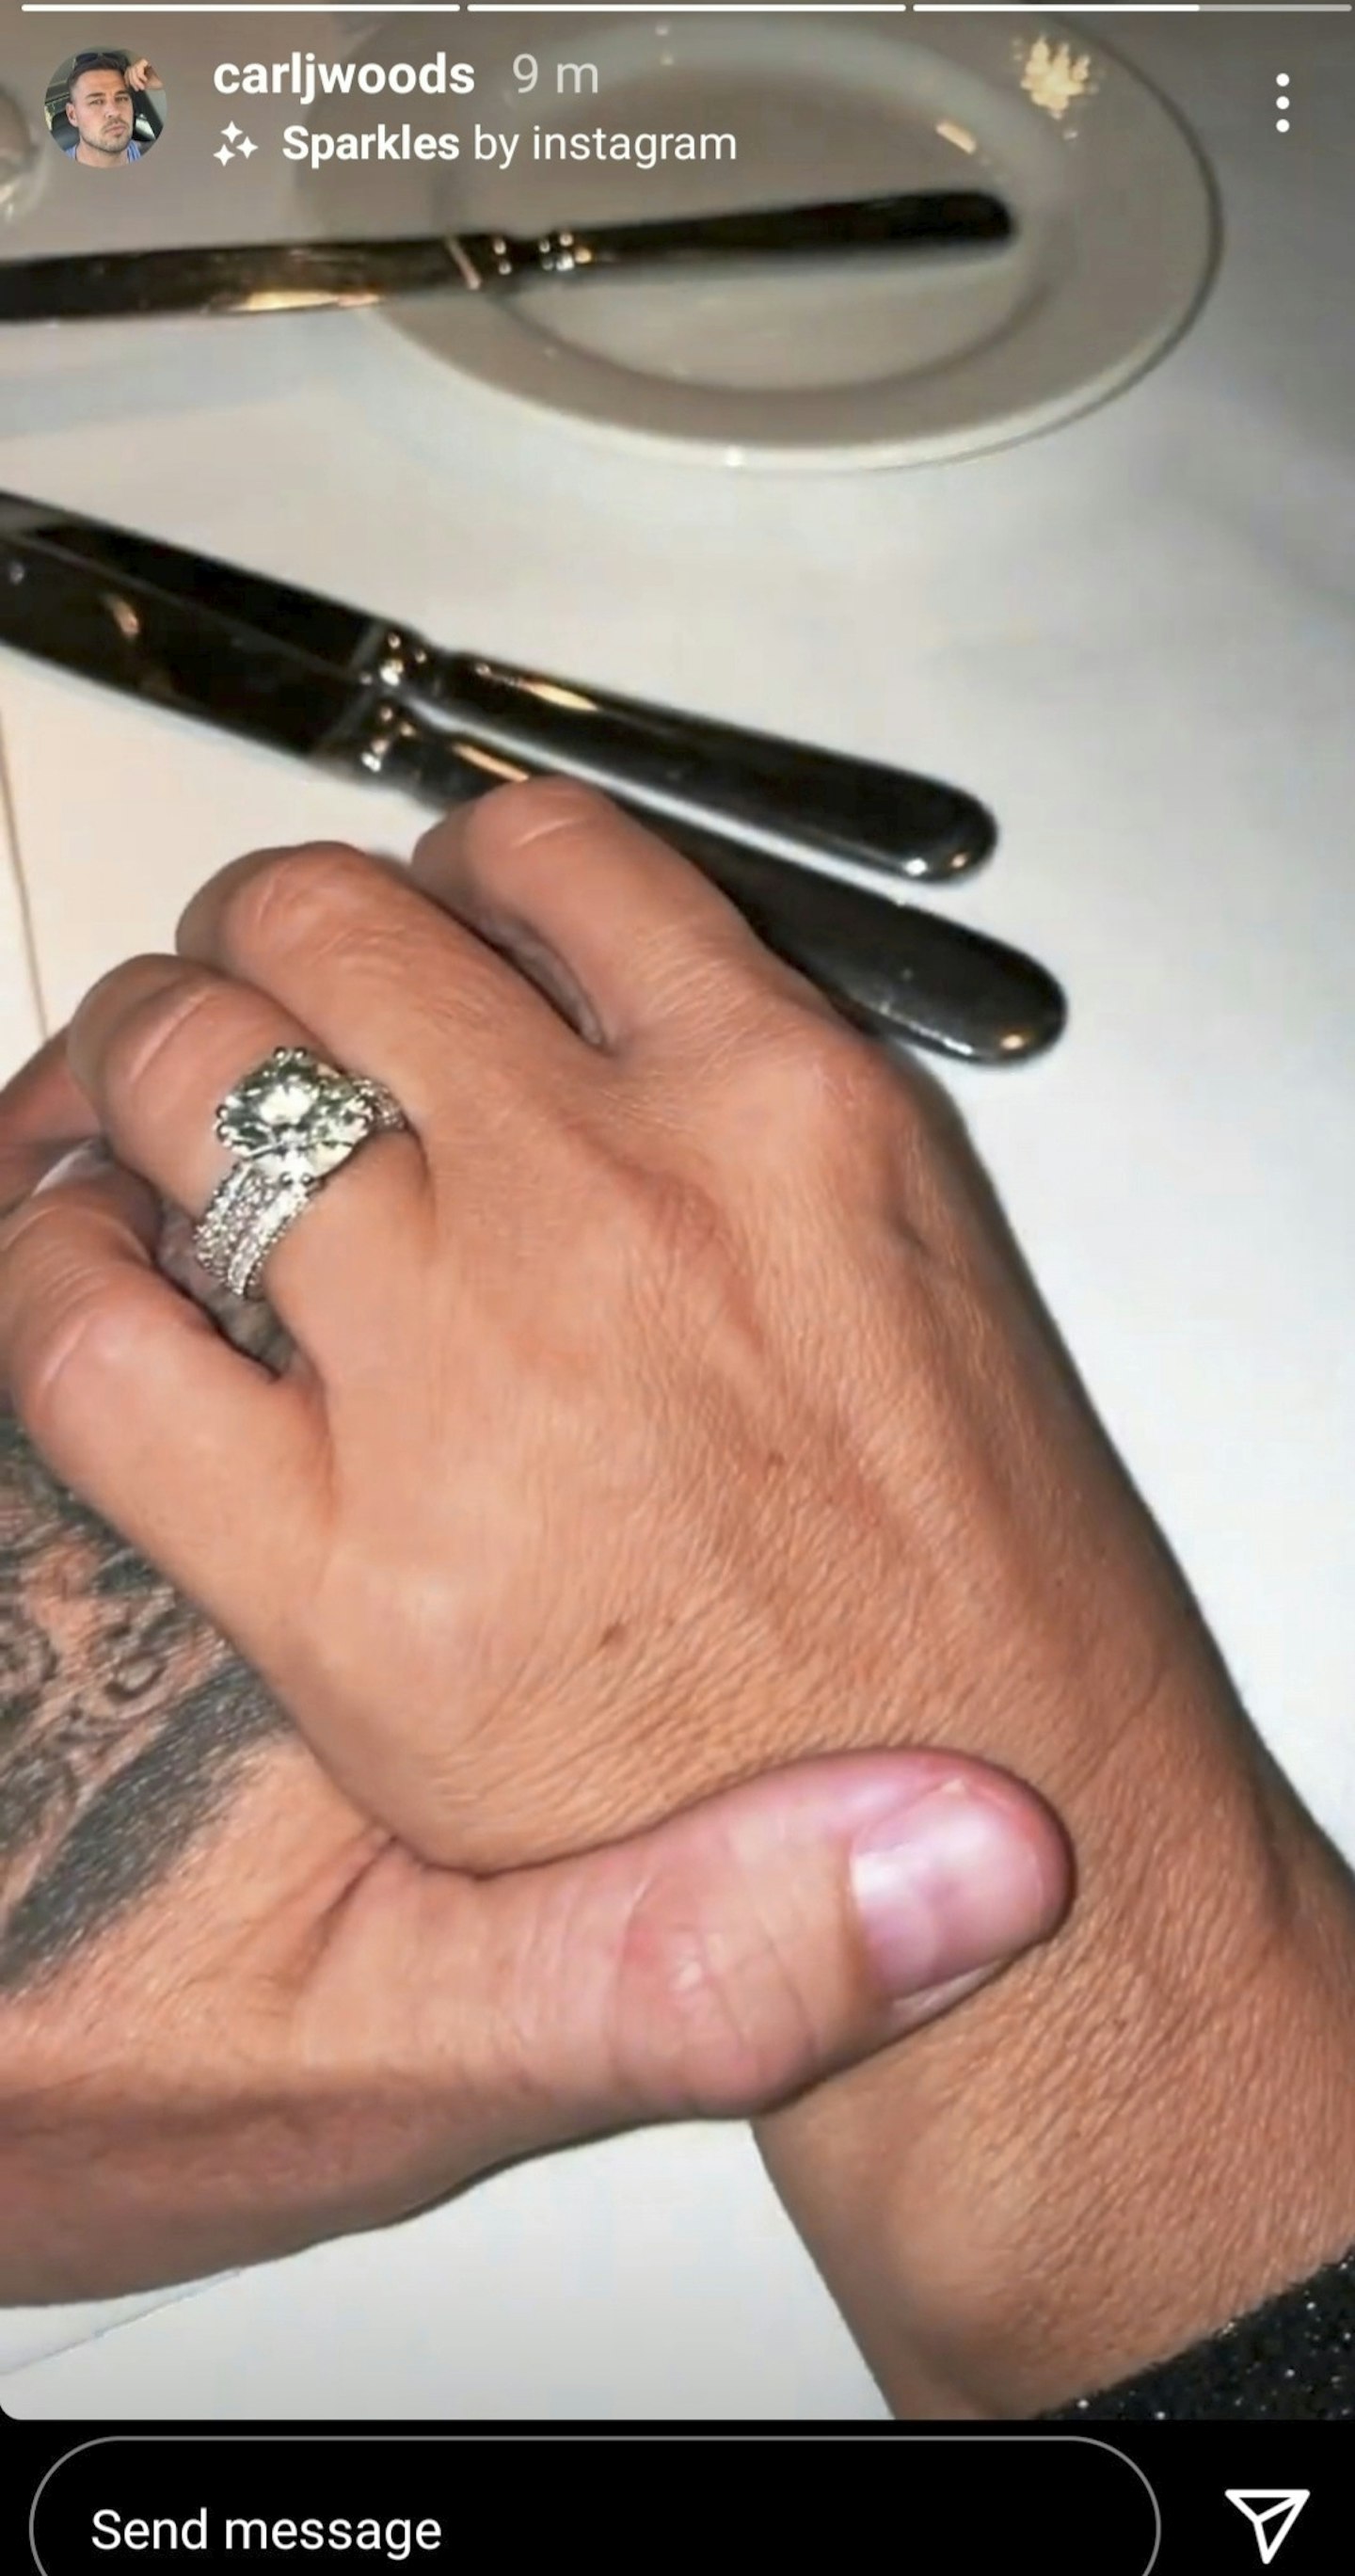 Carl Woods and Katie Price engagement ring